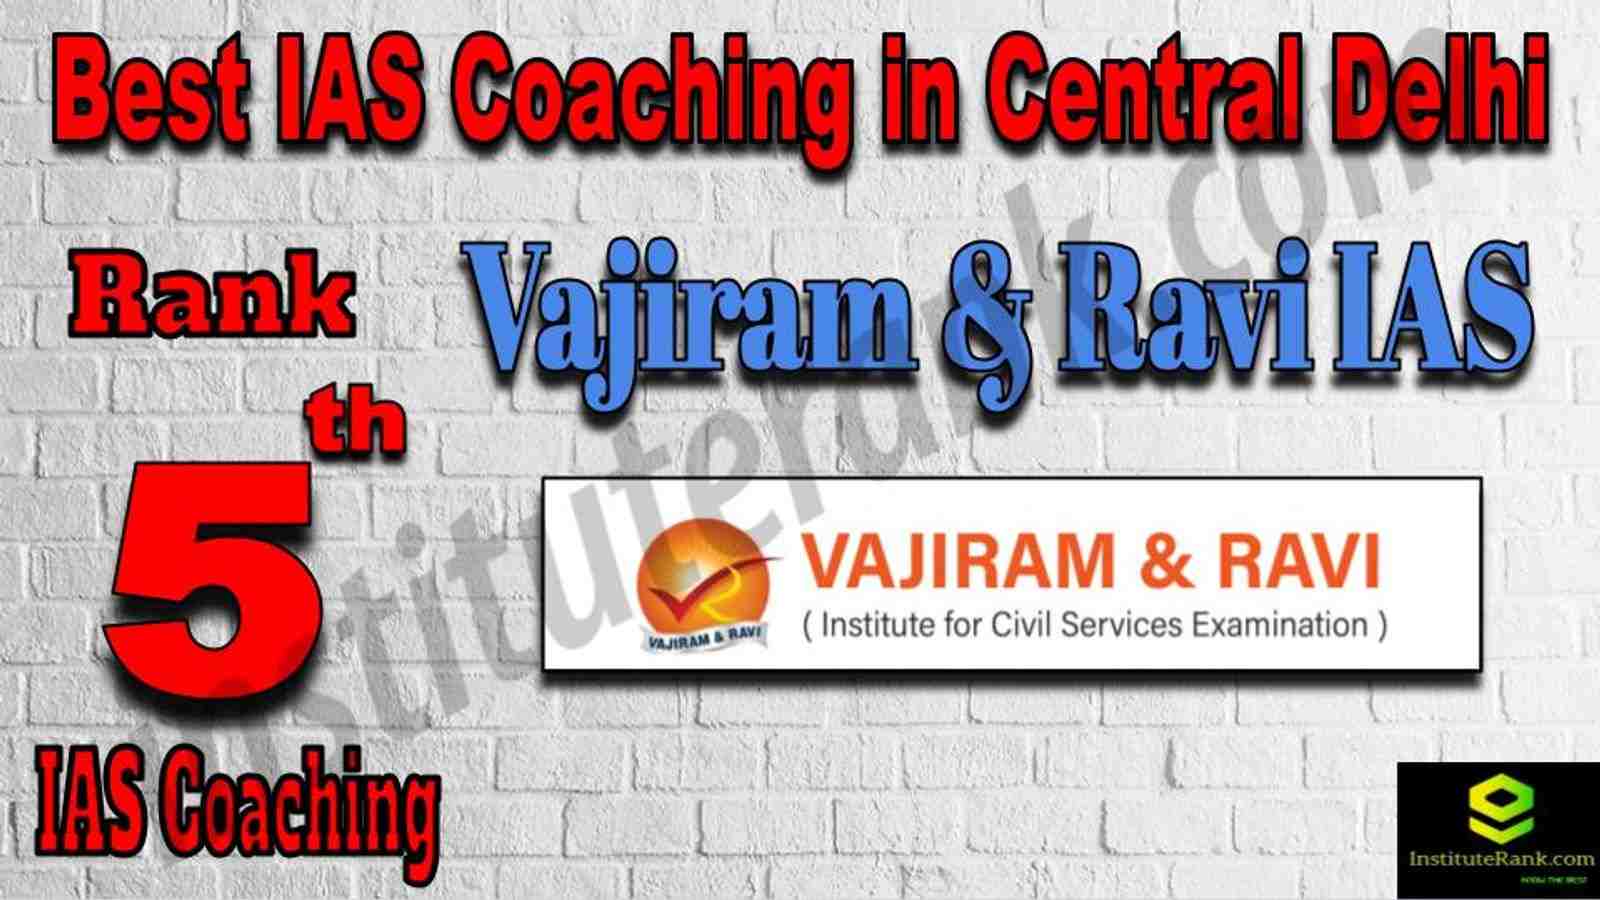 5th Best IAS Coaching in Central Delhi